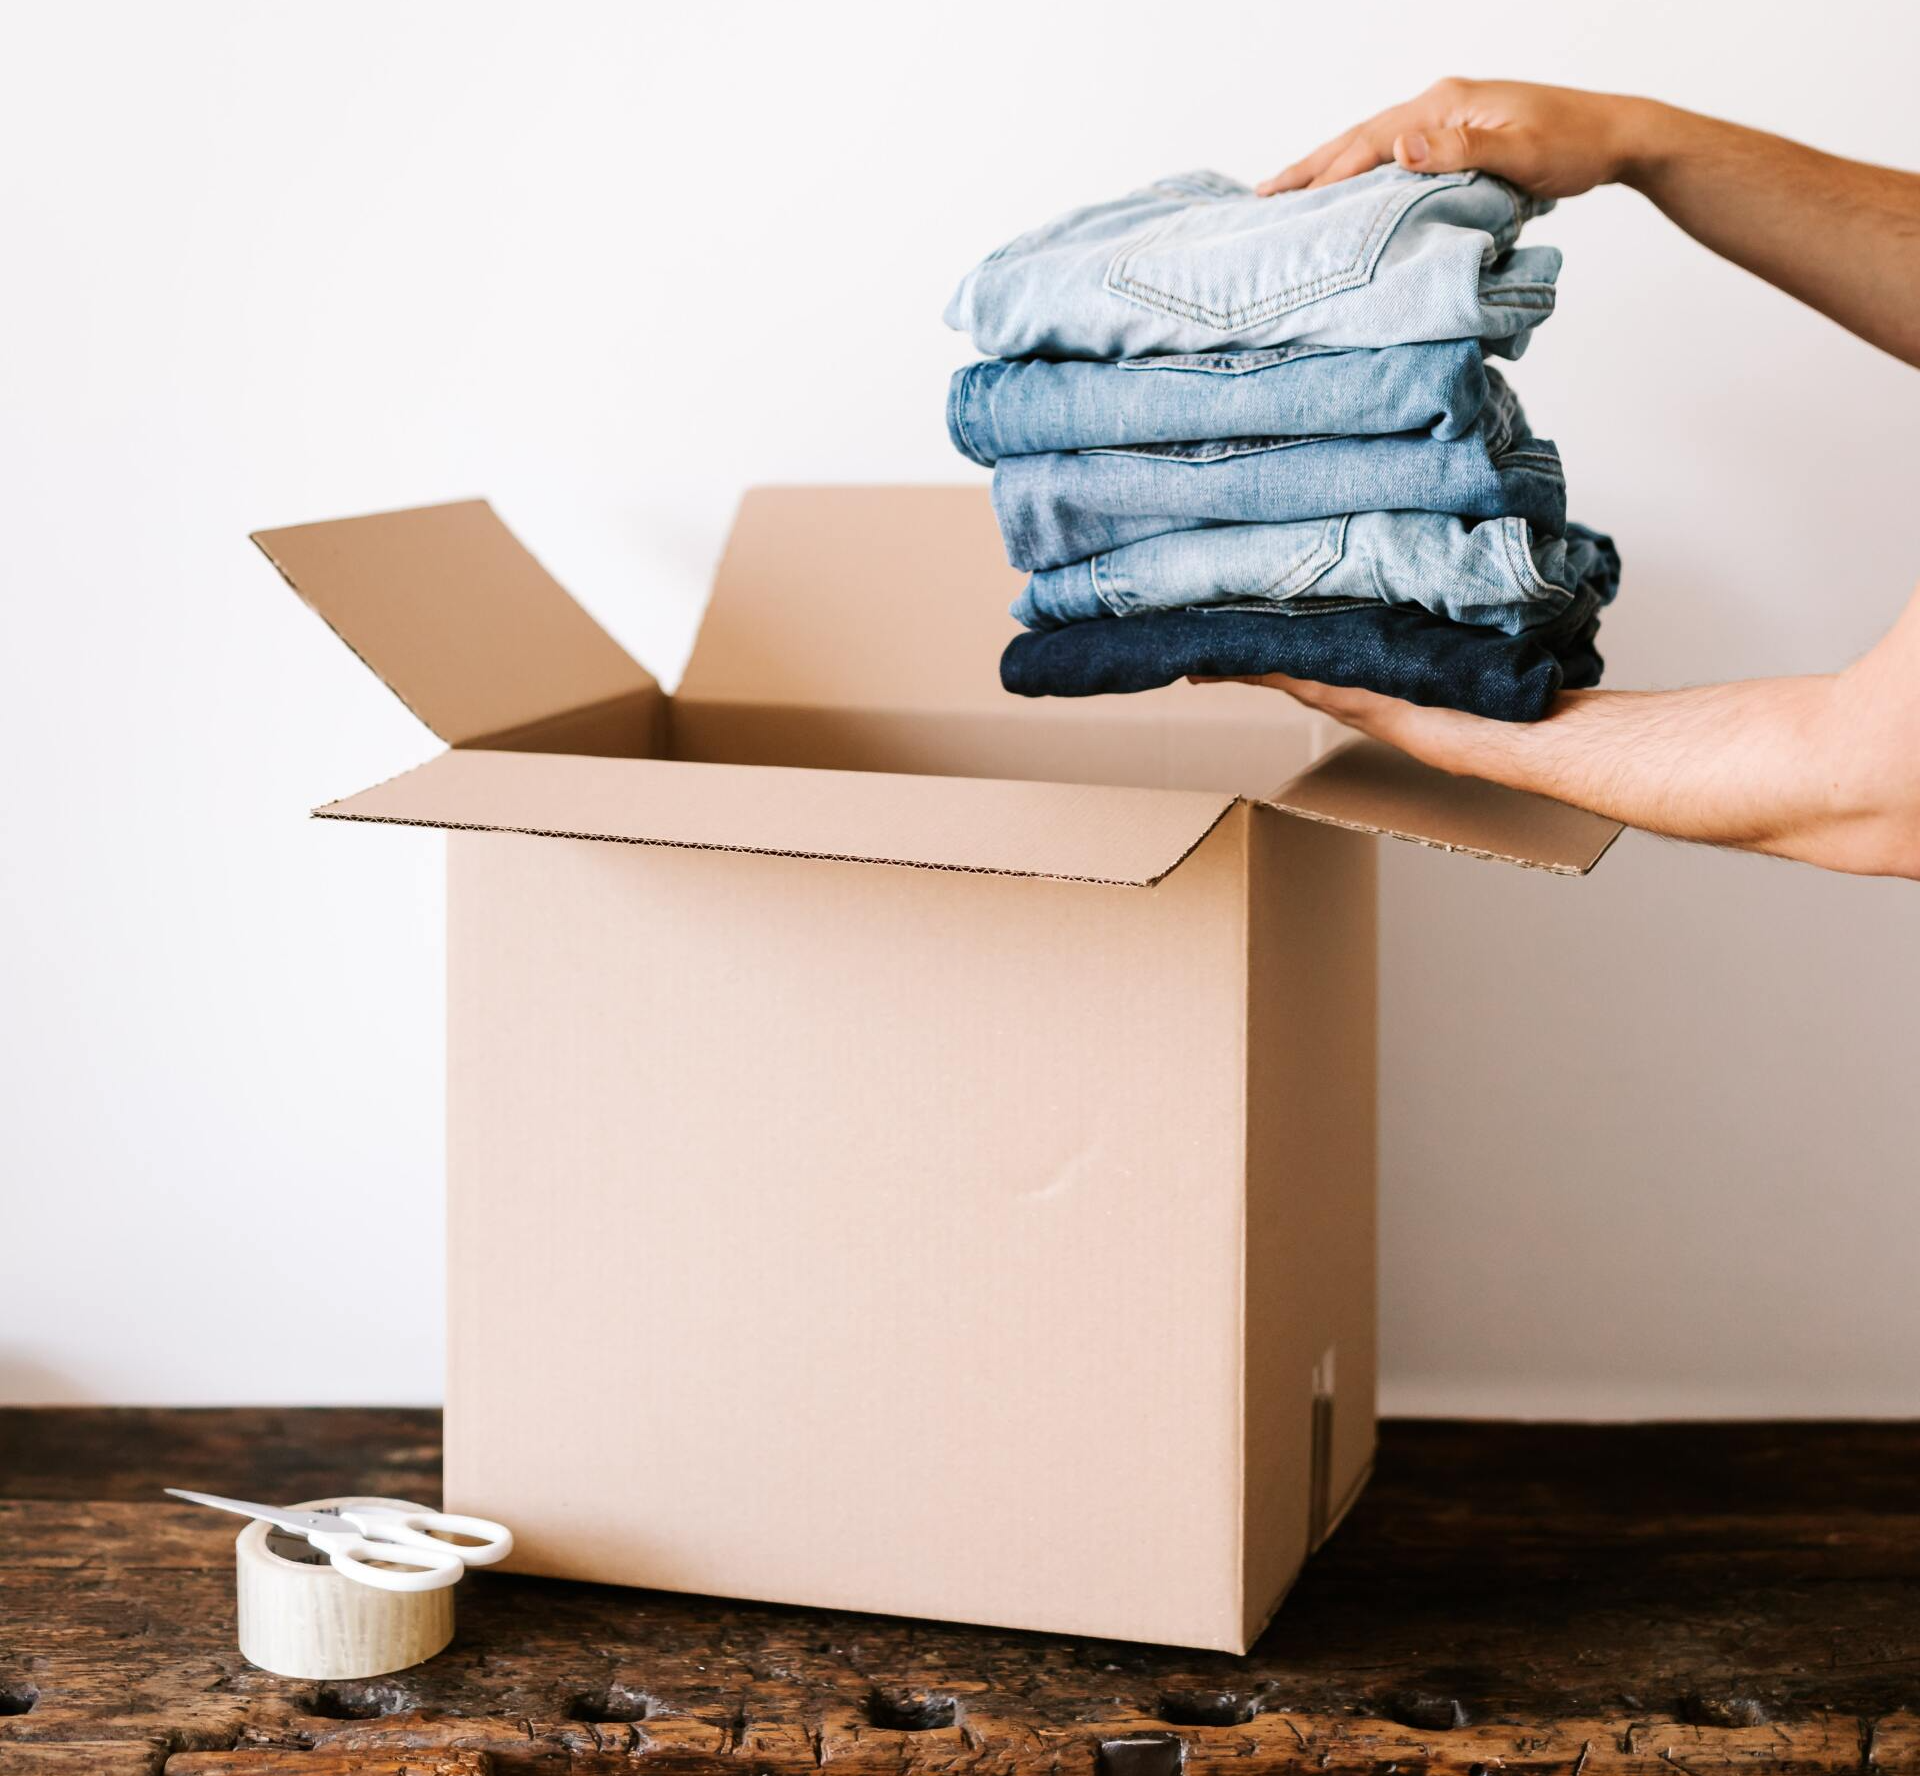 How To Get Organized For Your Next Big Move